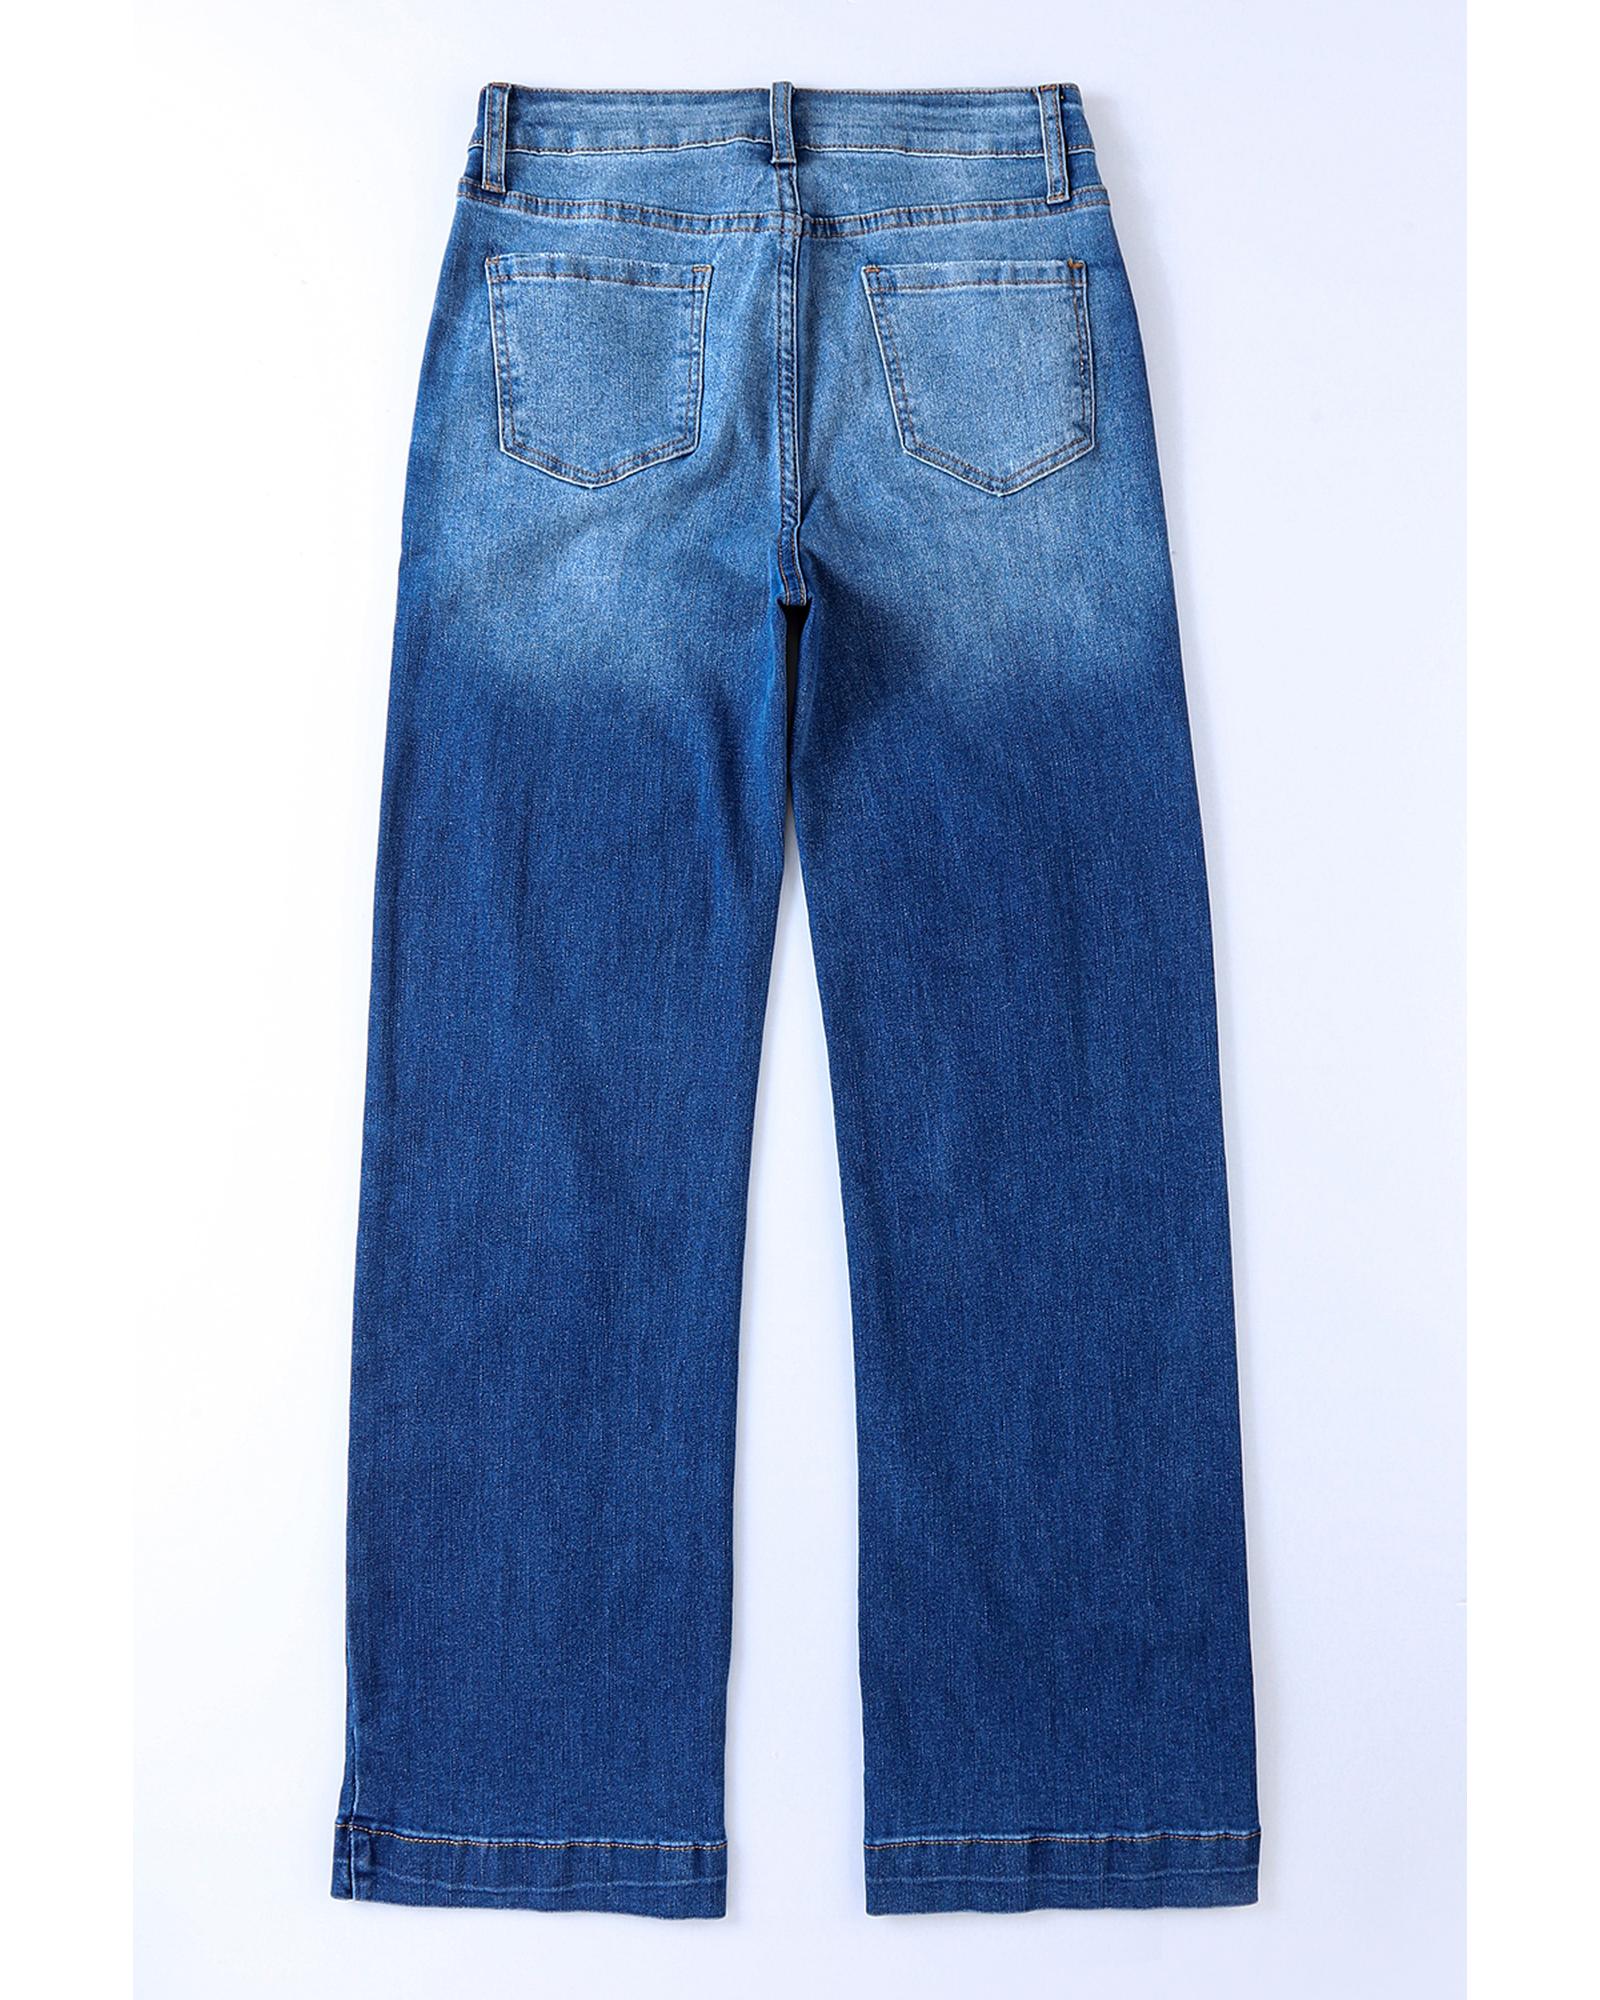 Wide Leg High Rise Jeans - 16 US